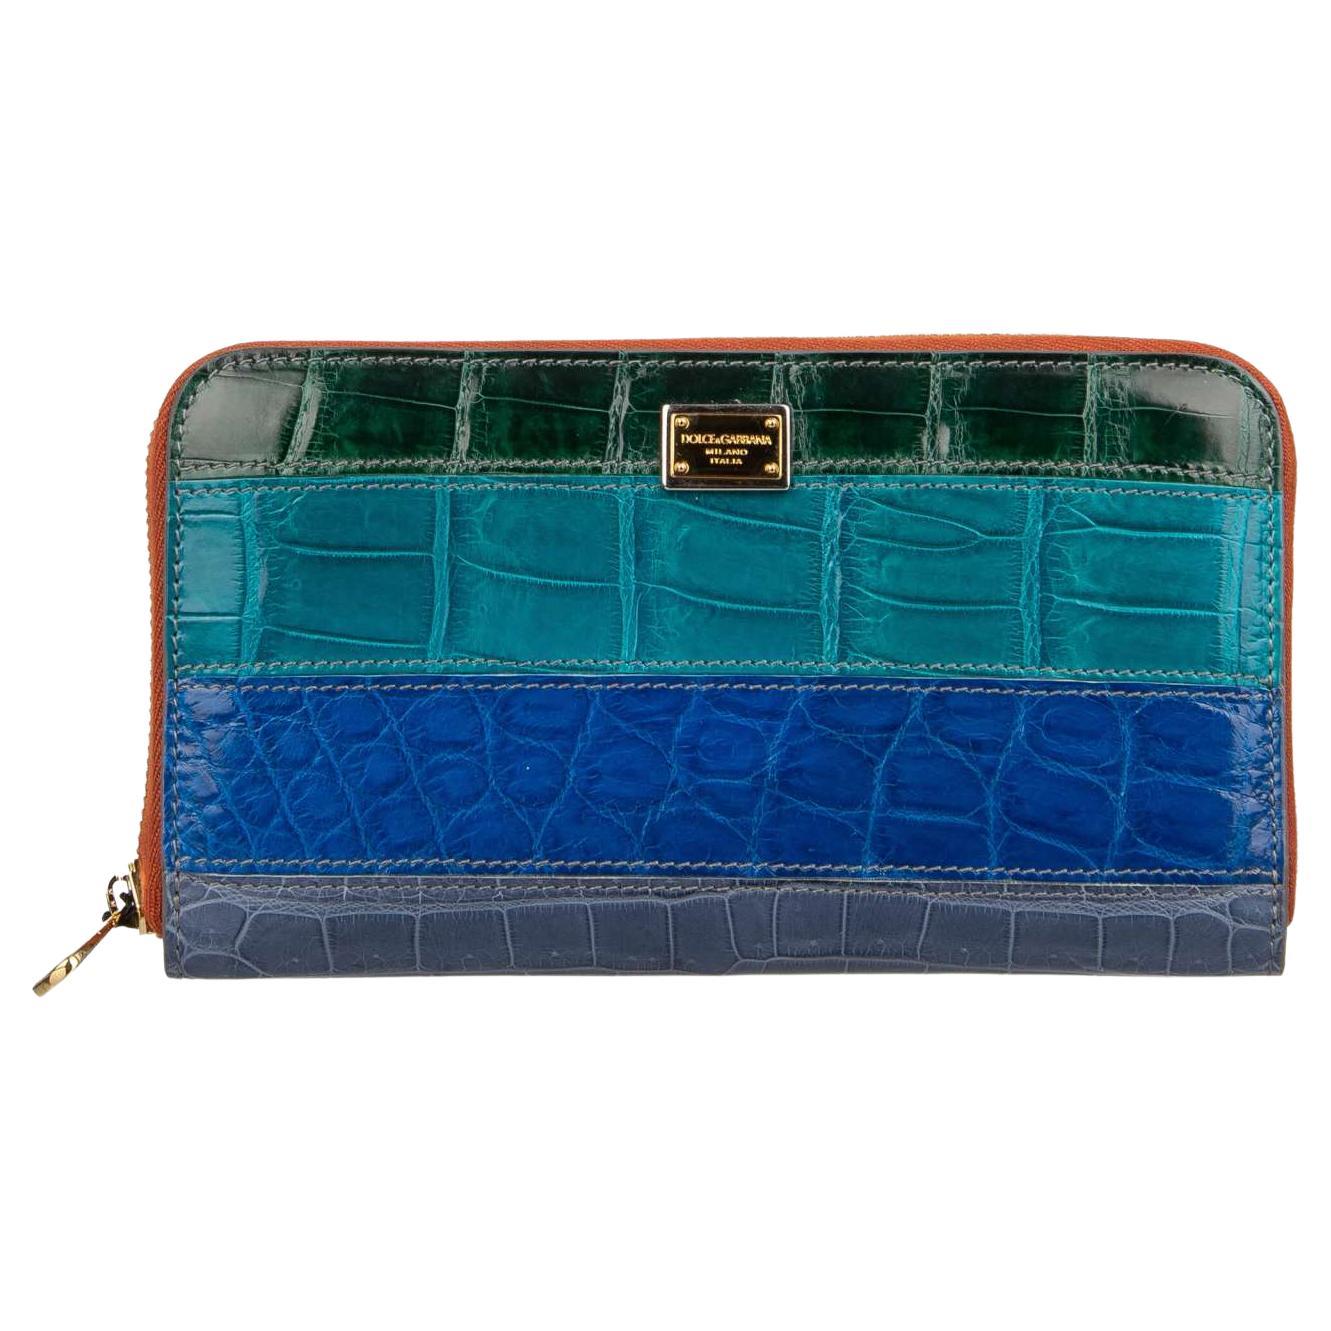 Dolce & Gabbana Striped Patchwork Crocodile Leather Zip-Around Wallet Blue Green For Sale